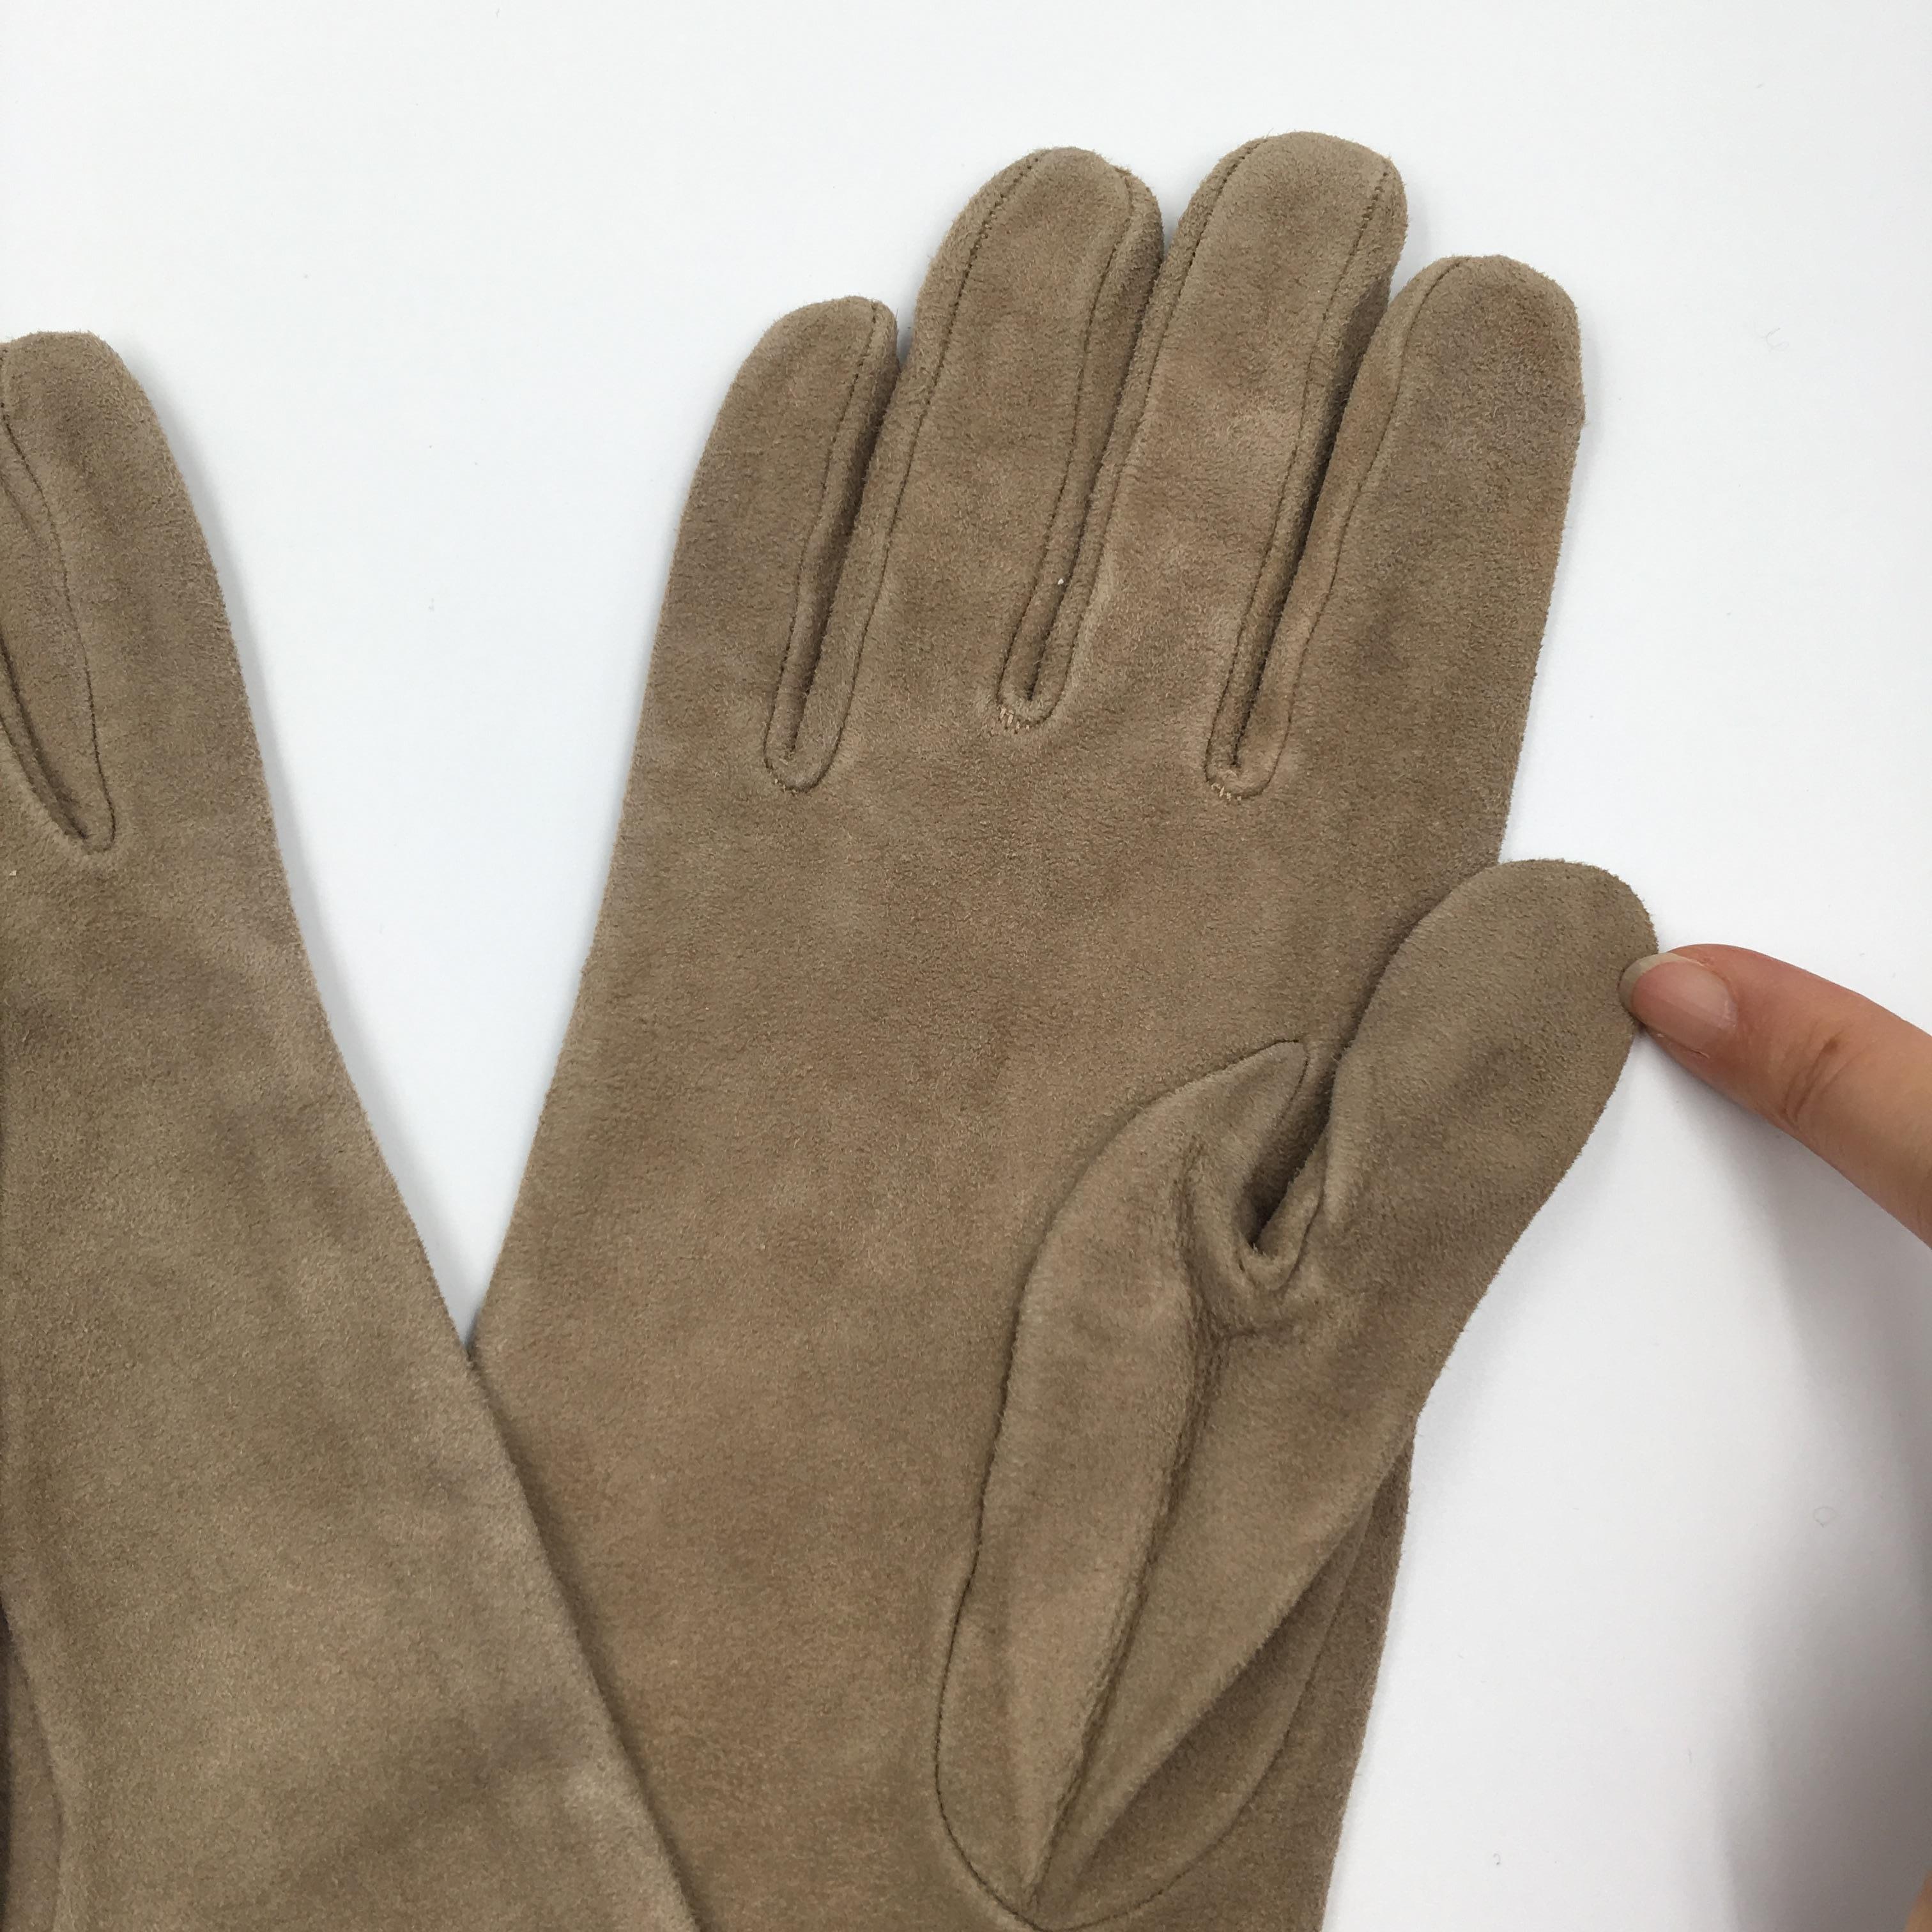 Christian Dior Tan Suede and Lace Trimmed Elbow Length Gloves NWT In Good Condition For Sale In Los Angeles, CA